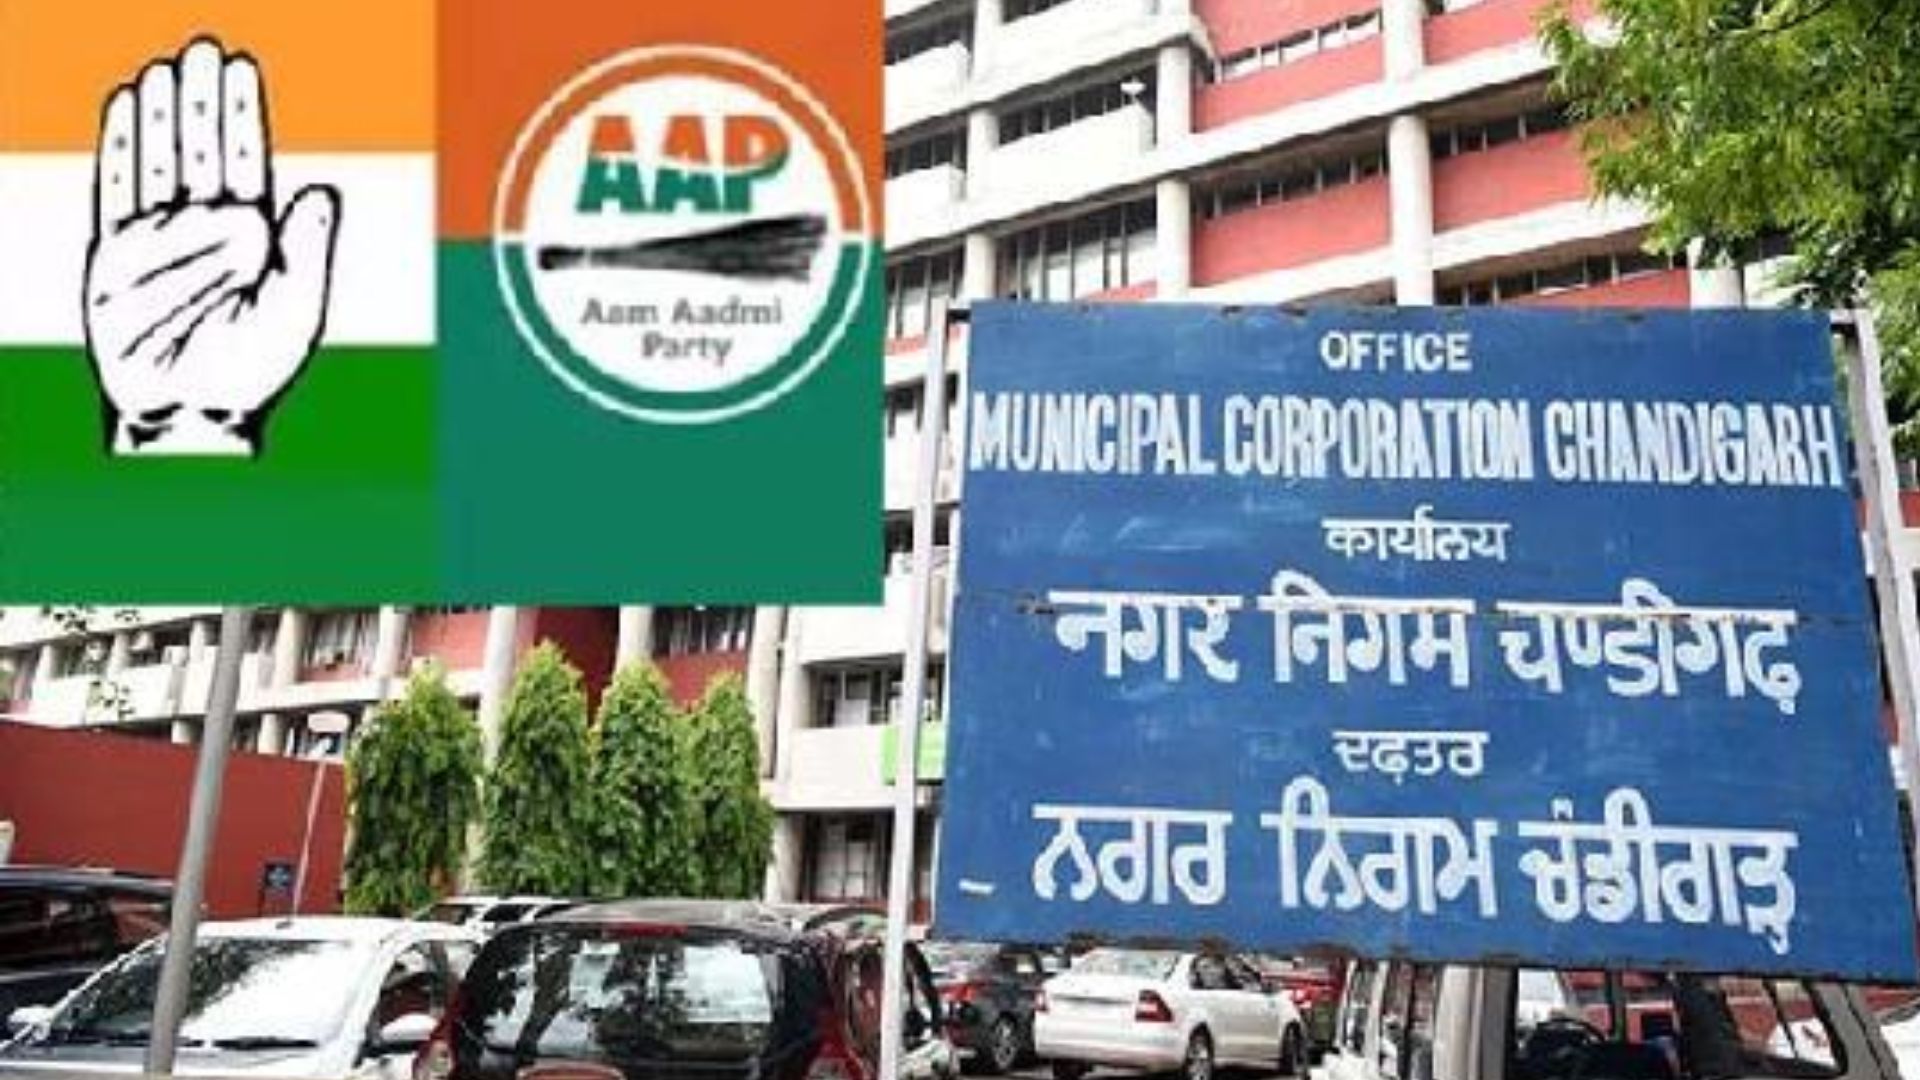 Congress and AAP together to contest Chandigarh mayor elections on January 18